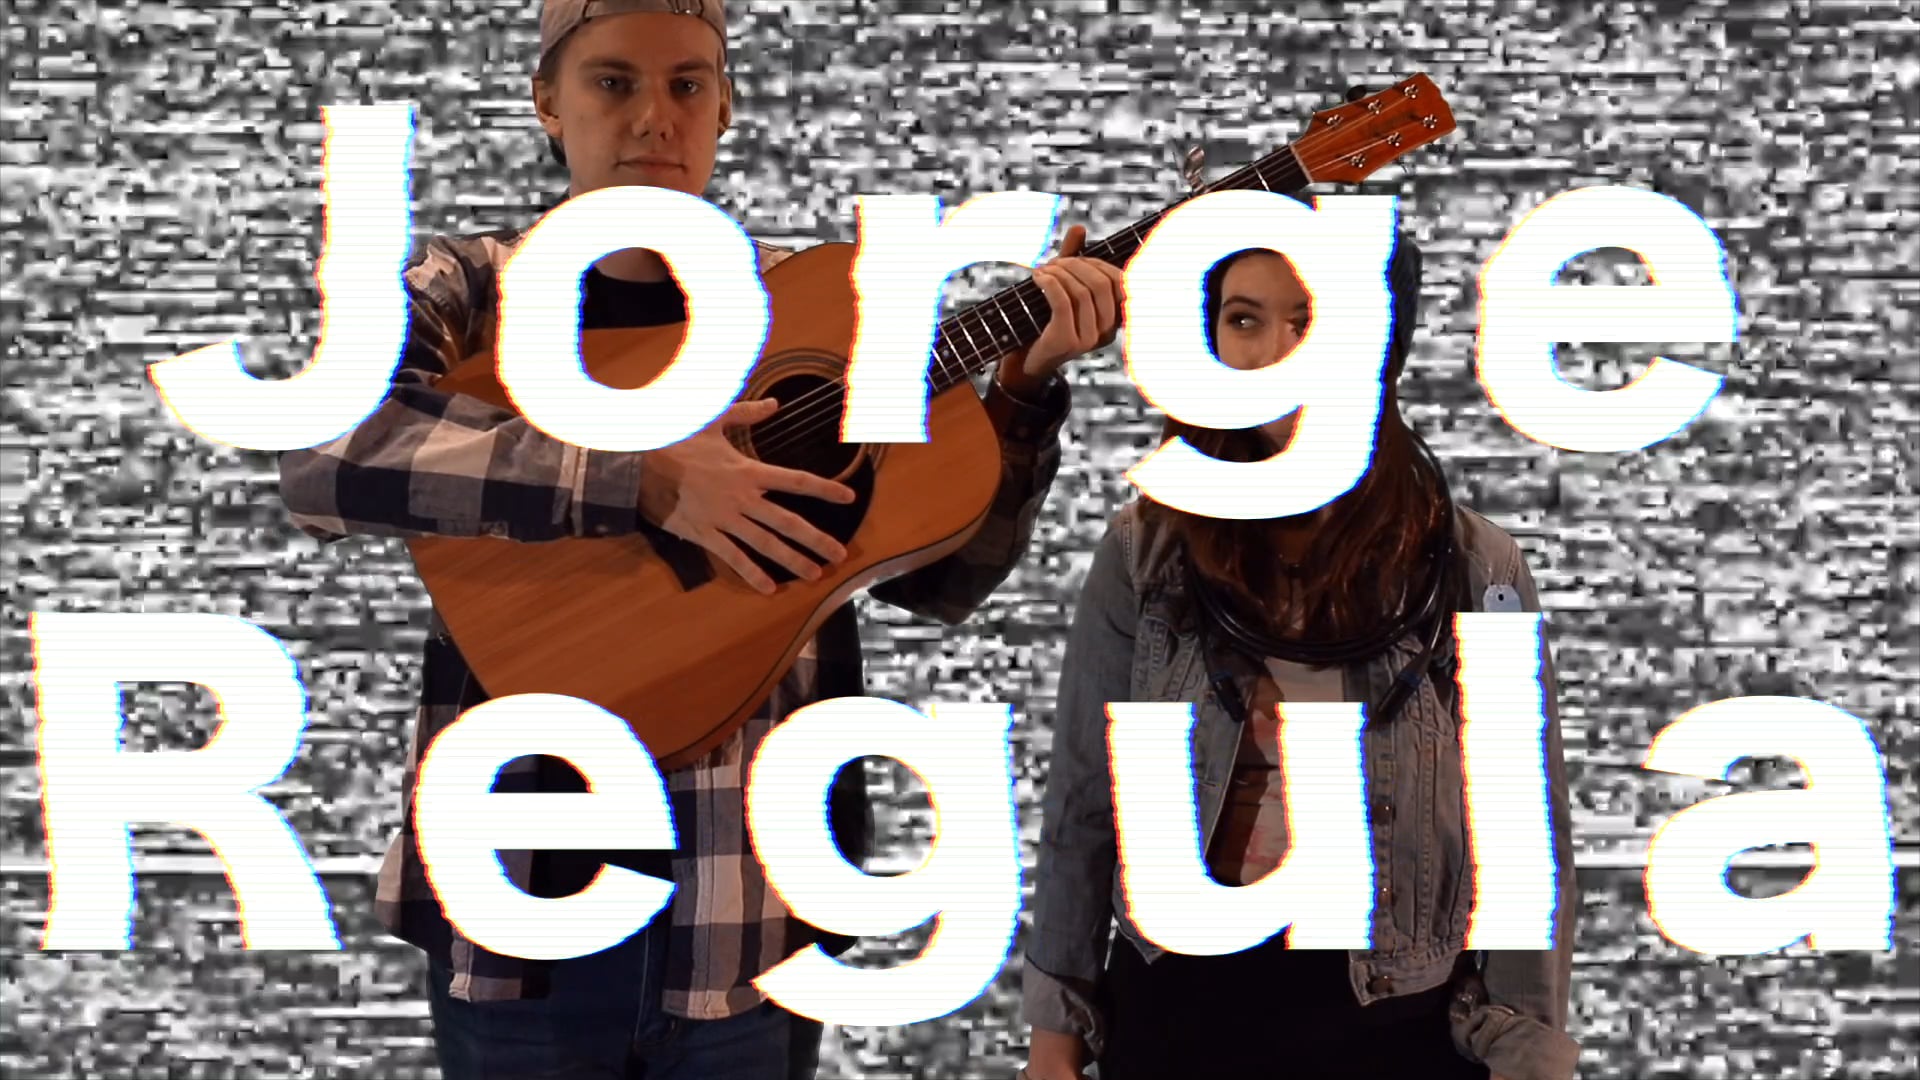 Jorge Regula (Cover) - The Soggy Bean Curds